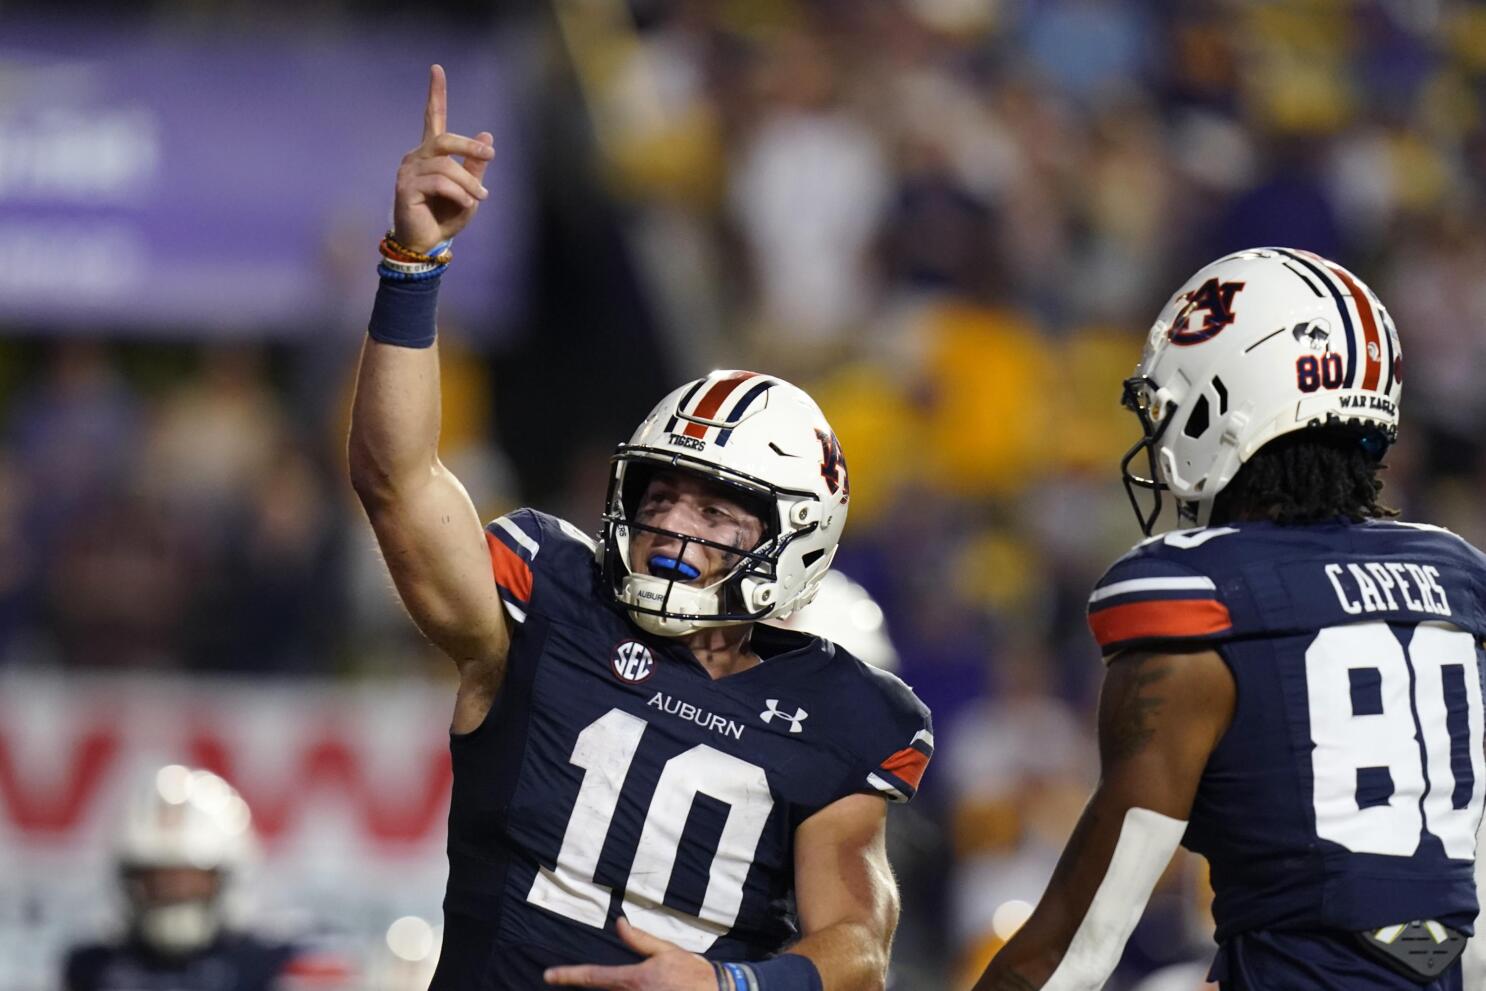 Auburn Propelled By TouchDown Drive Leading To A Win With A Score Of 14 - 10